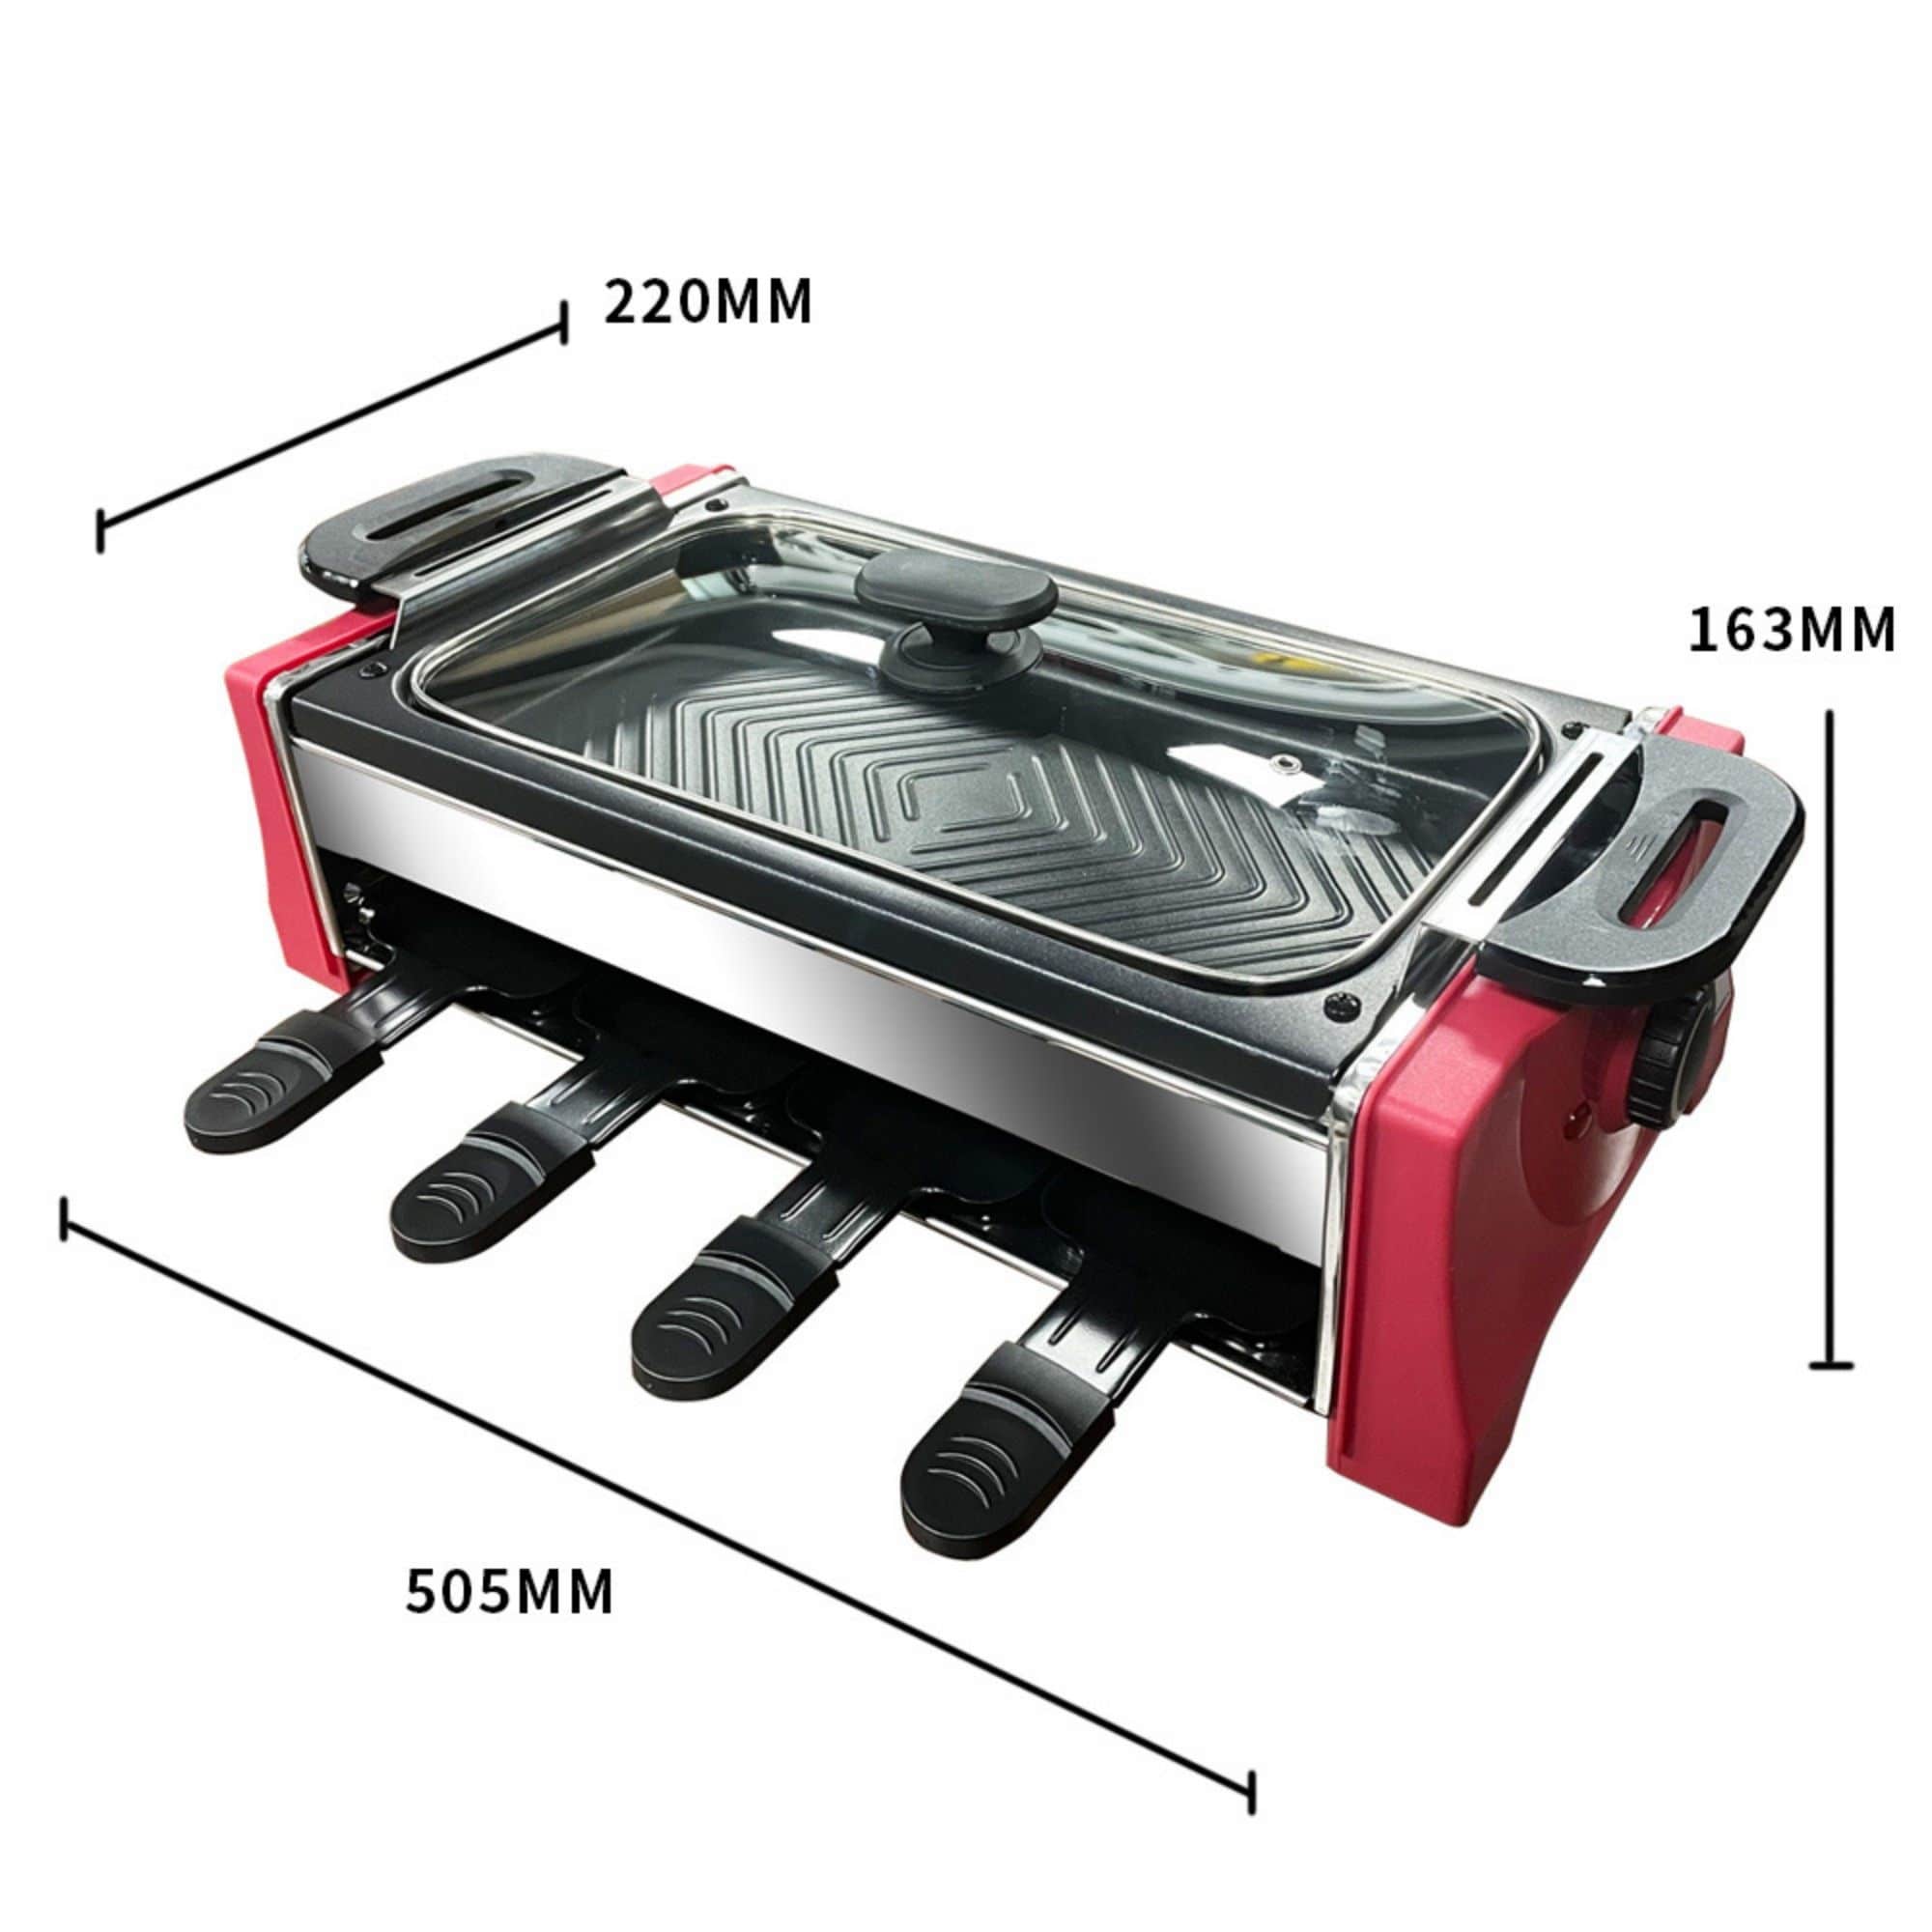 Mini Electric Raclette BBQ Grill Table Use for 2 Person - China Raclette  Grill and Electric Raclette Grill price